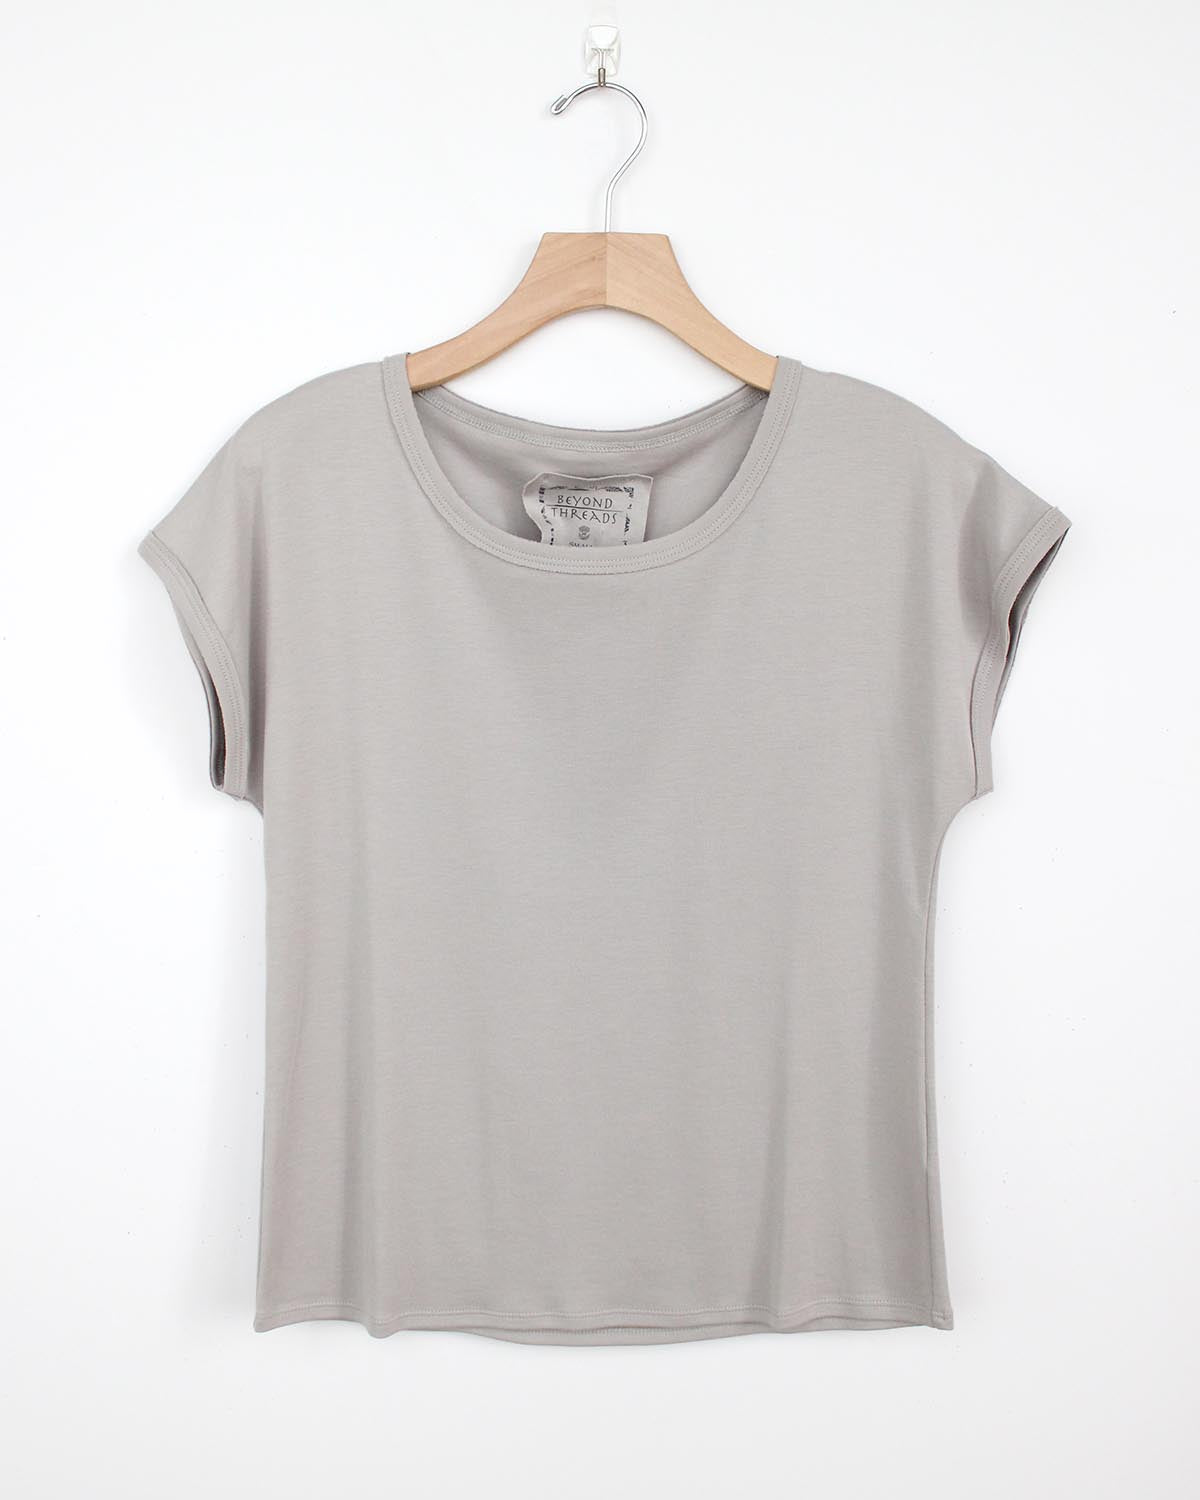 Pima Cap Sleeve Tee in Discontinued Colors